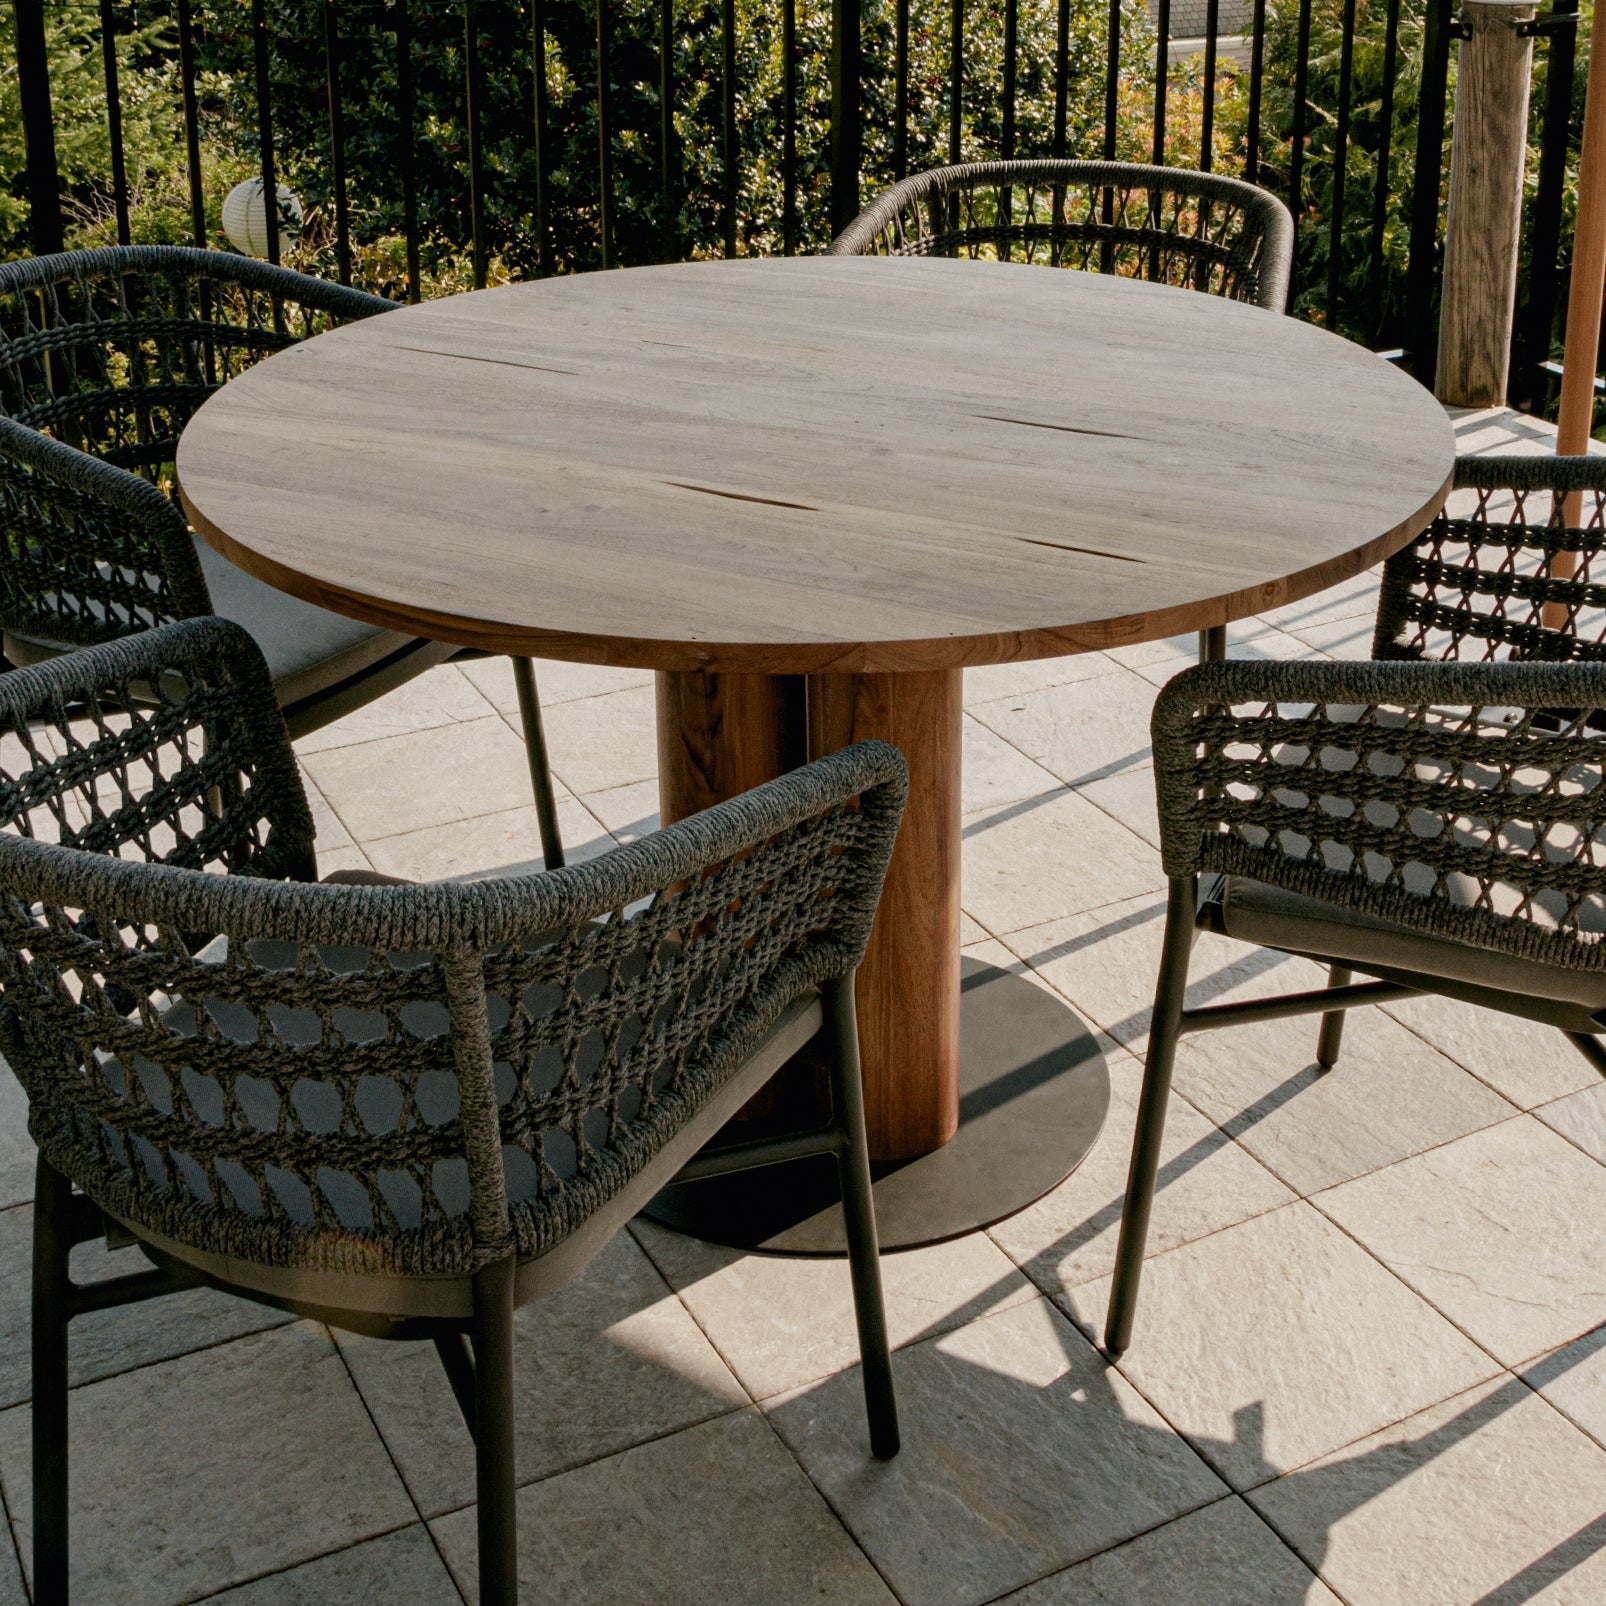 Formation Outdoor Dining Table, Seats 4-5 People, Teak - Image 9